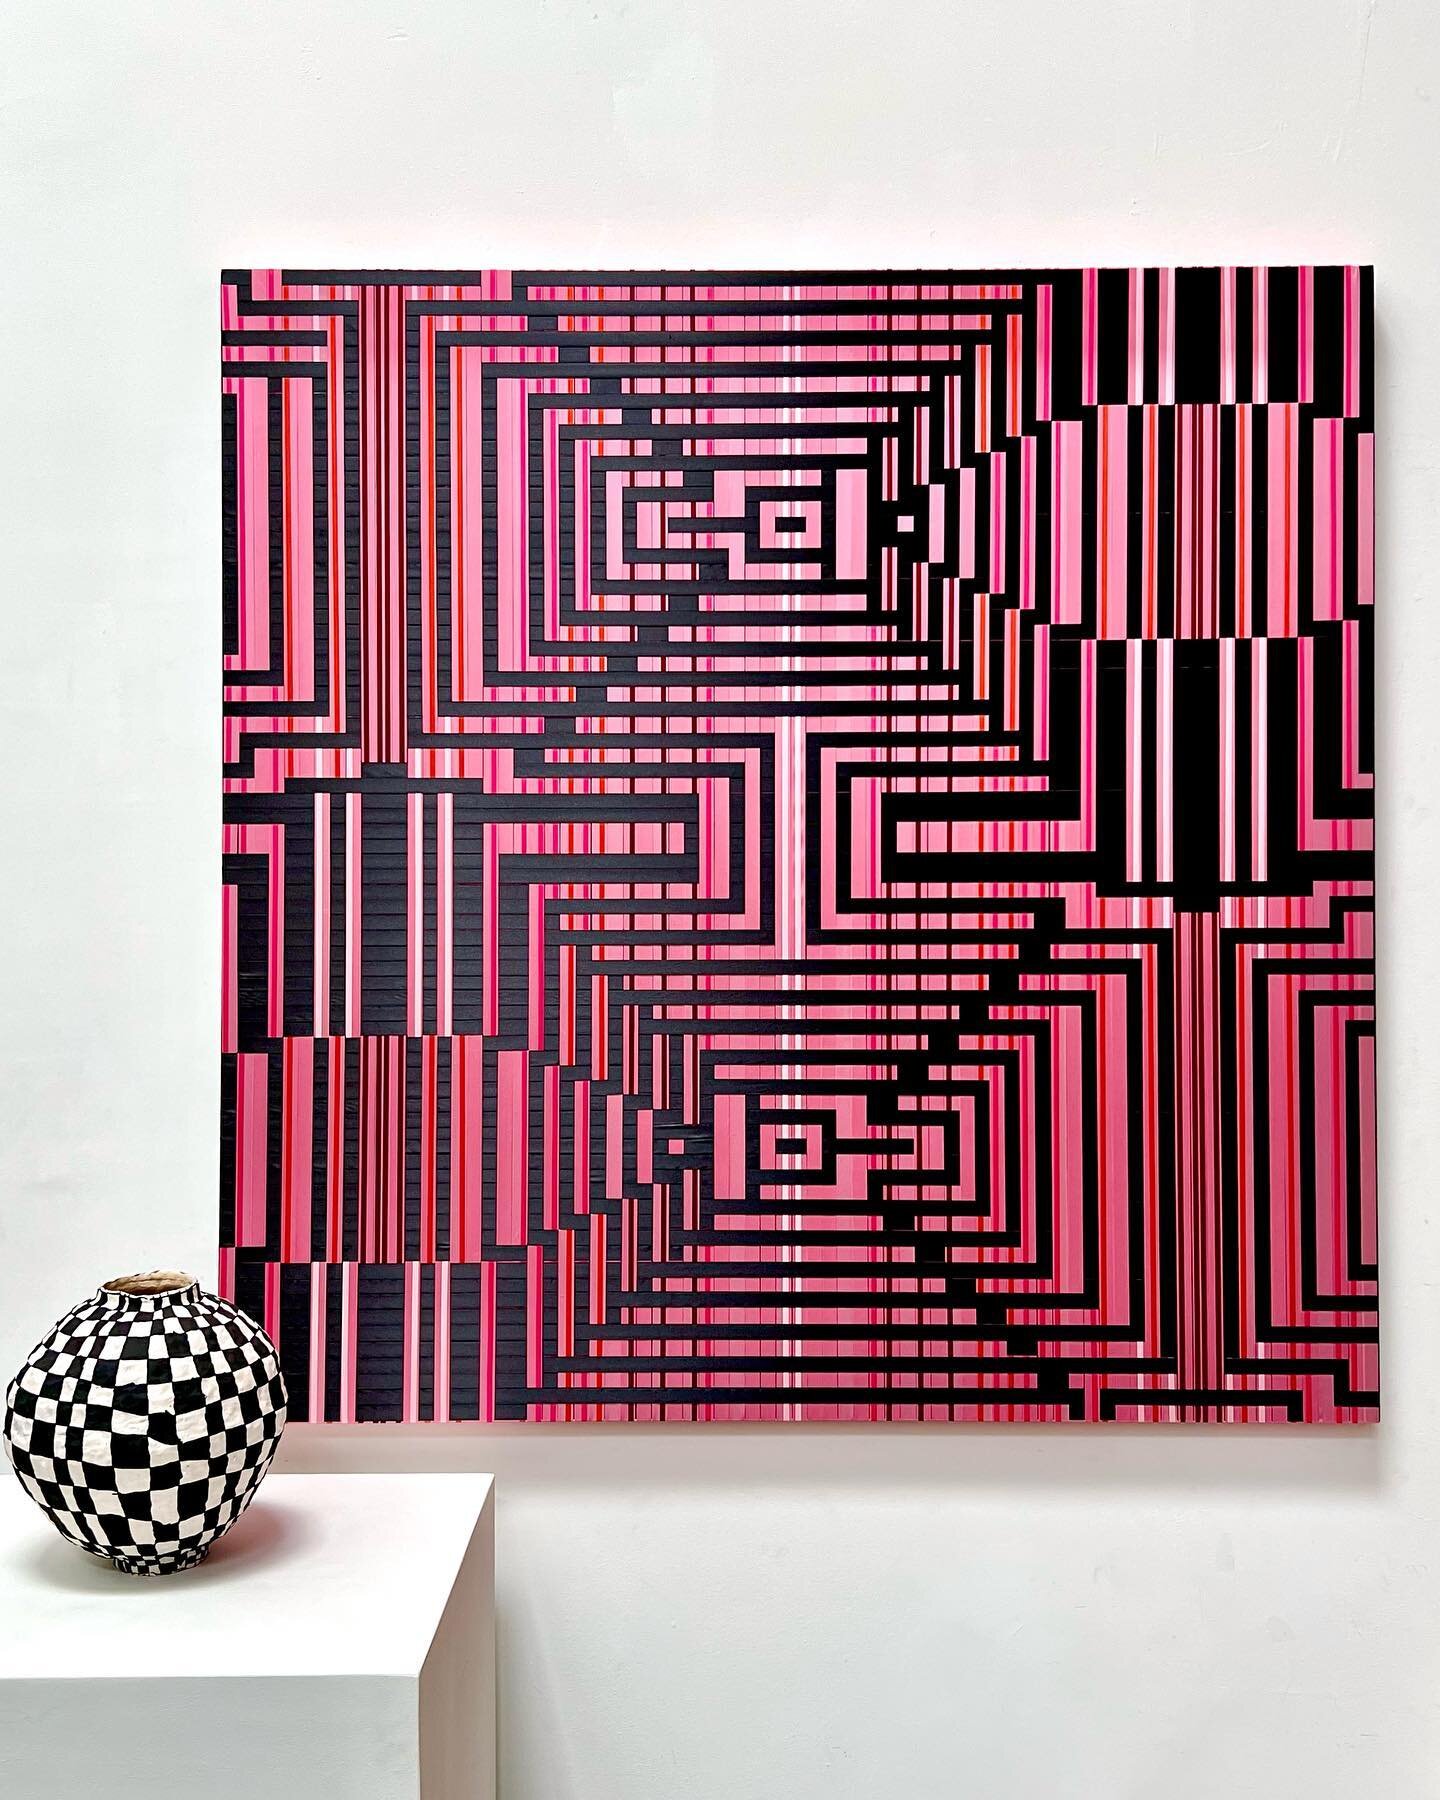 Katrin Aason B.
has been in LA all week for our exhibition opening of Imperfect Geometry, and she made this incredible new woven pink ribbon piece in our back room.  Tomorrow is her last day in LA before returning to Costa Rica, so please come say he